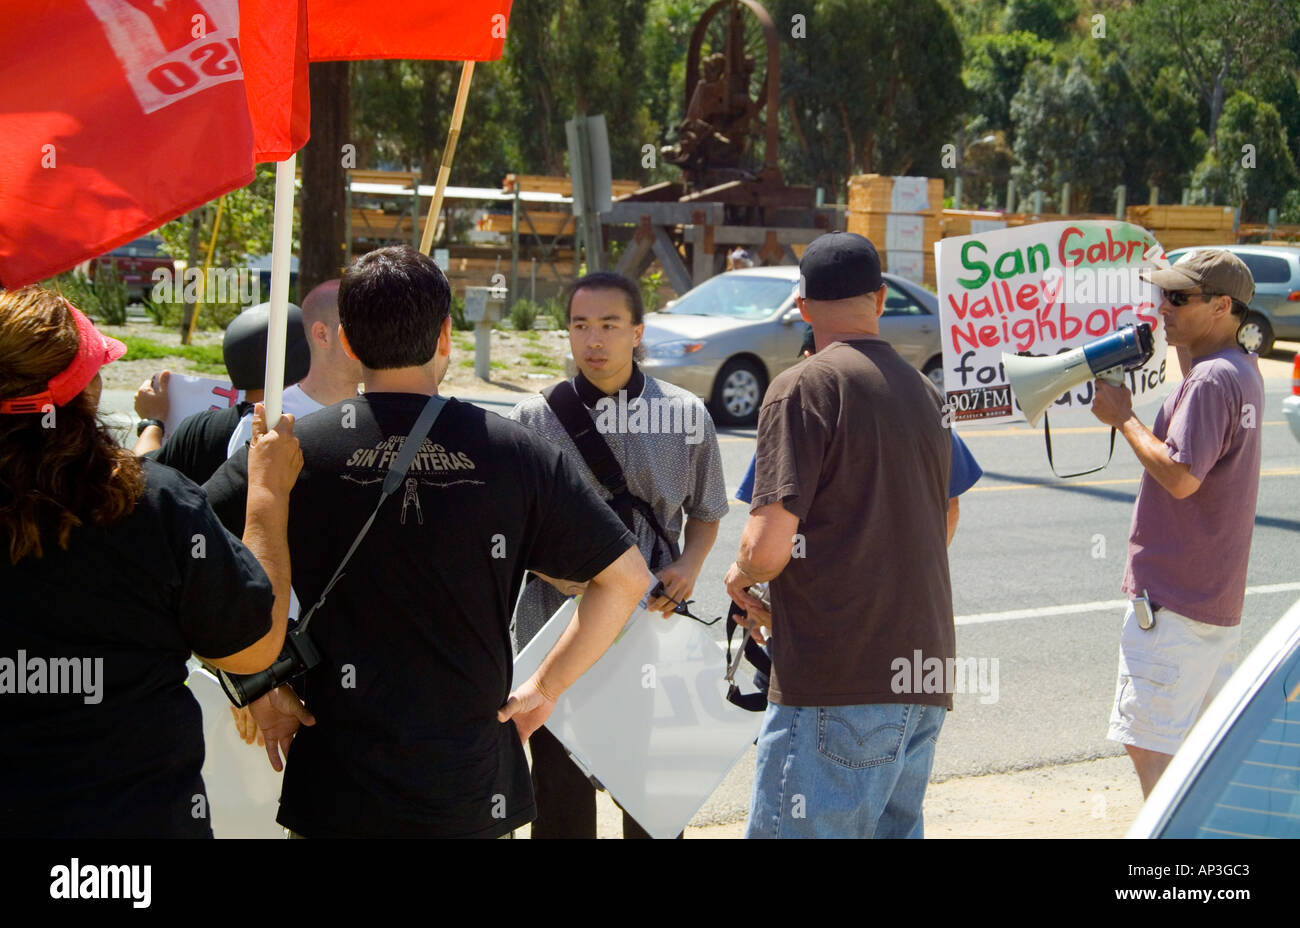 A Hispanic demonstrator confronts anti- illegal immigant counter demonstrators at a rally in Laguna Beach, CA. Stock Photo